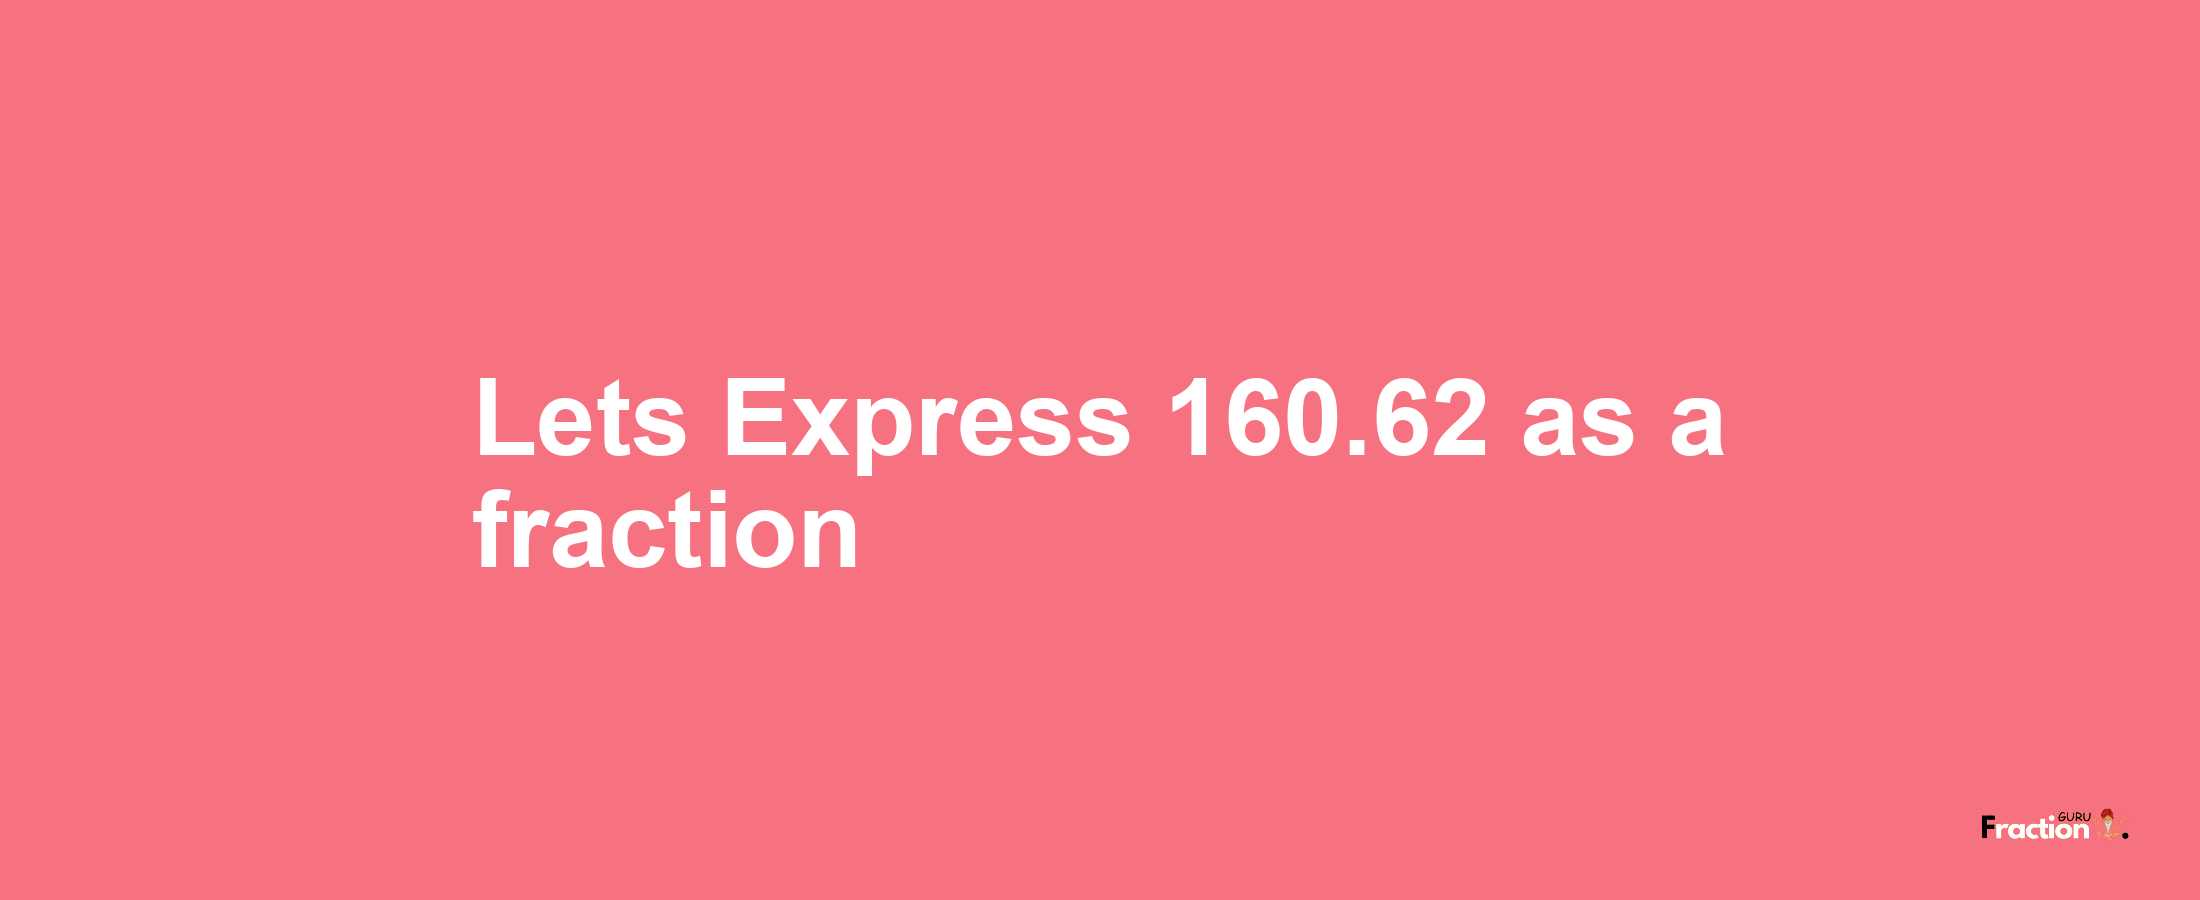 Lets Express 160.62 as afraction